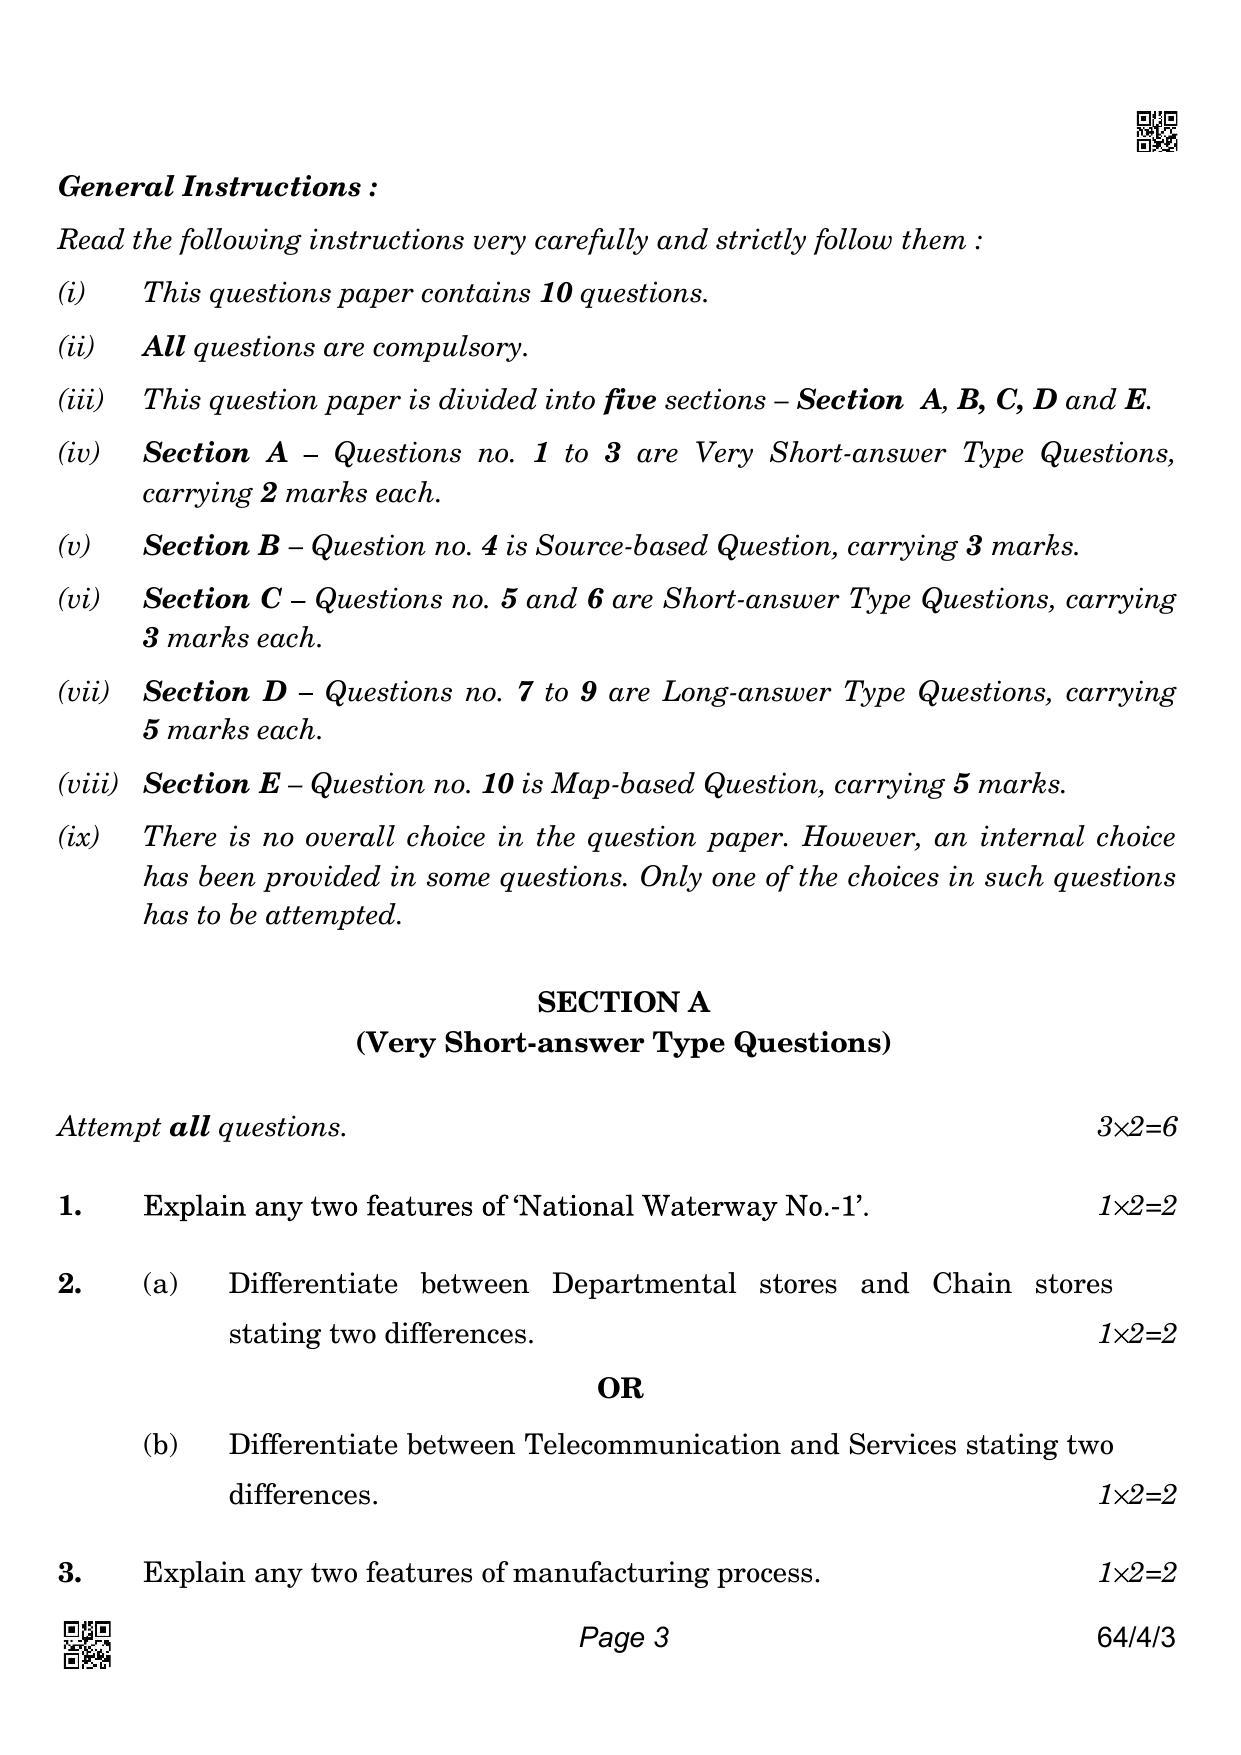 CBSE Class 12 64-4-3 Geography 2022 Question Paper - Page 3